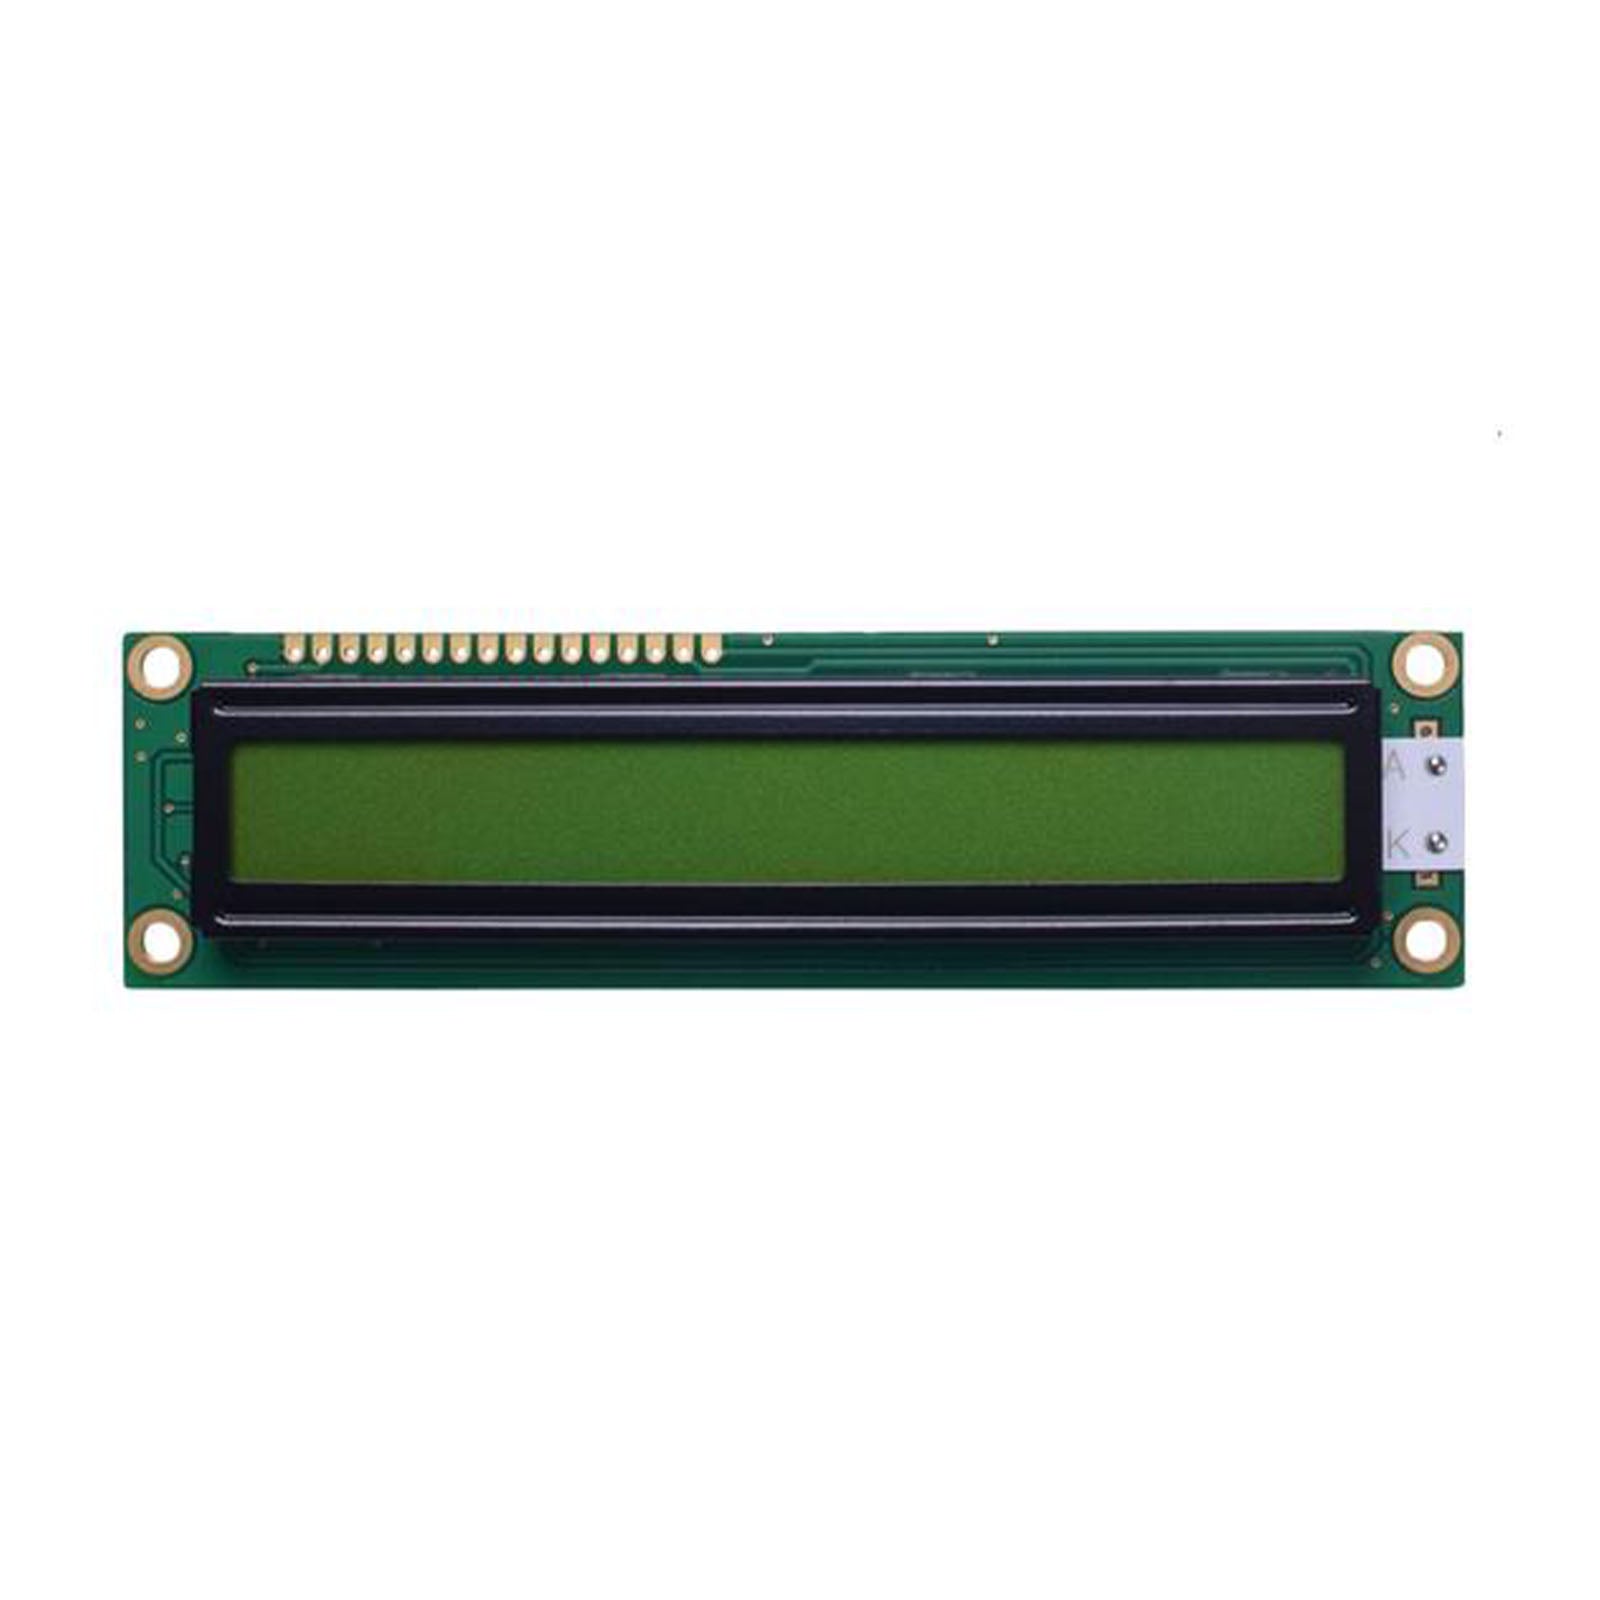 front of large 16 characters single line green LCD module